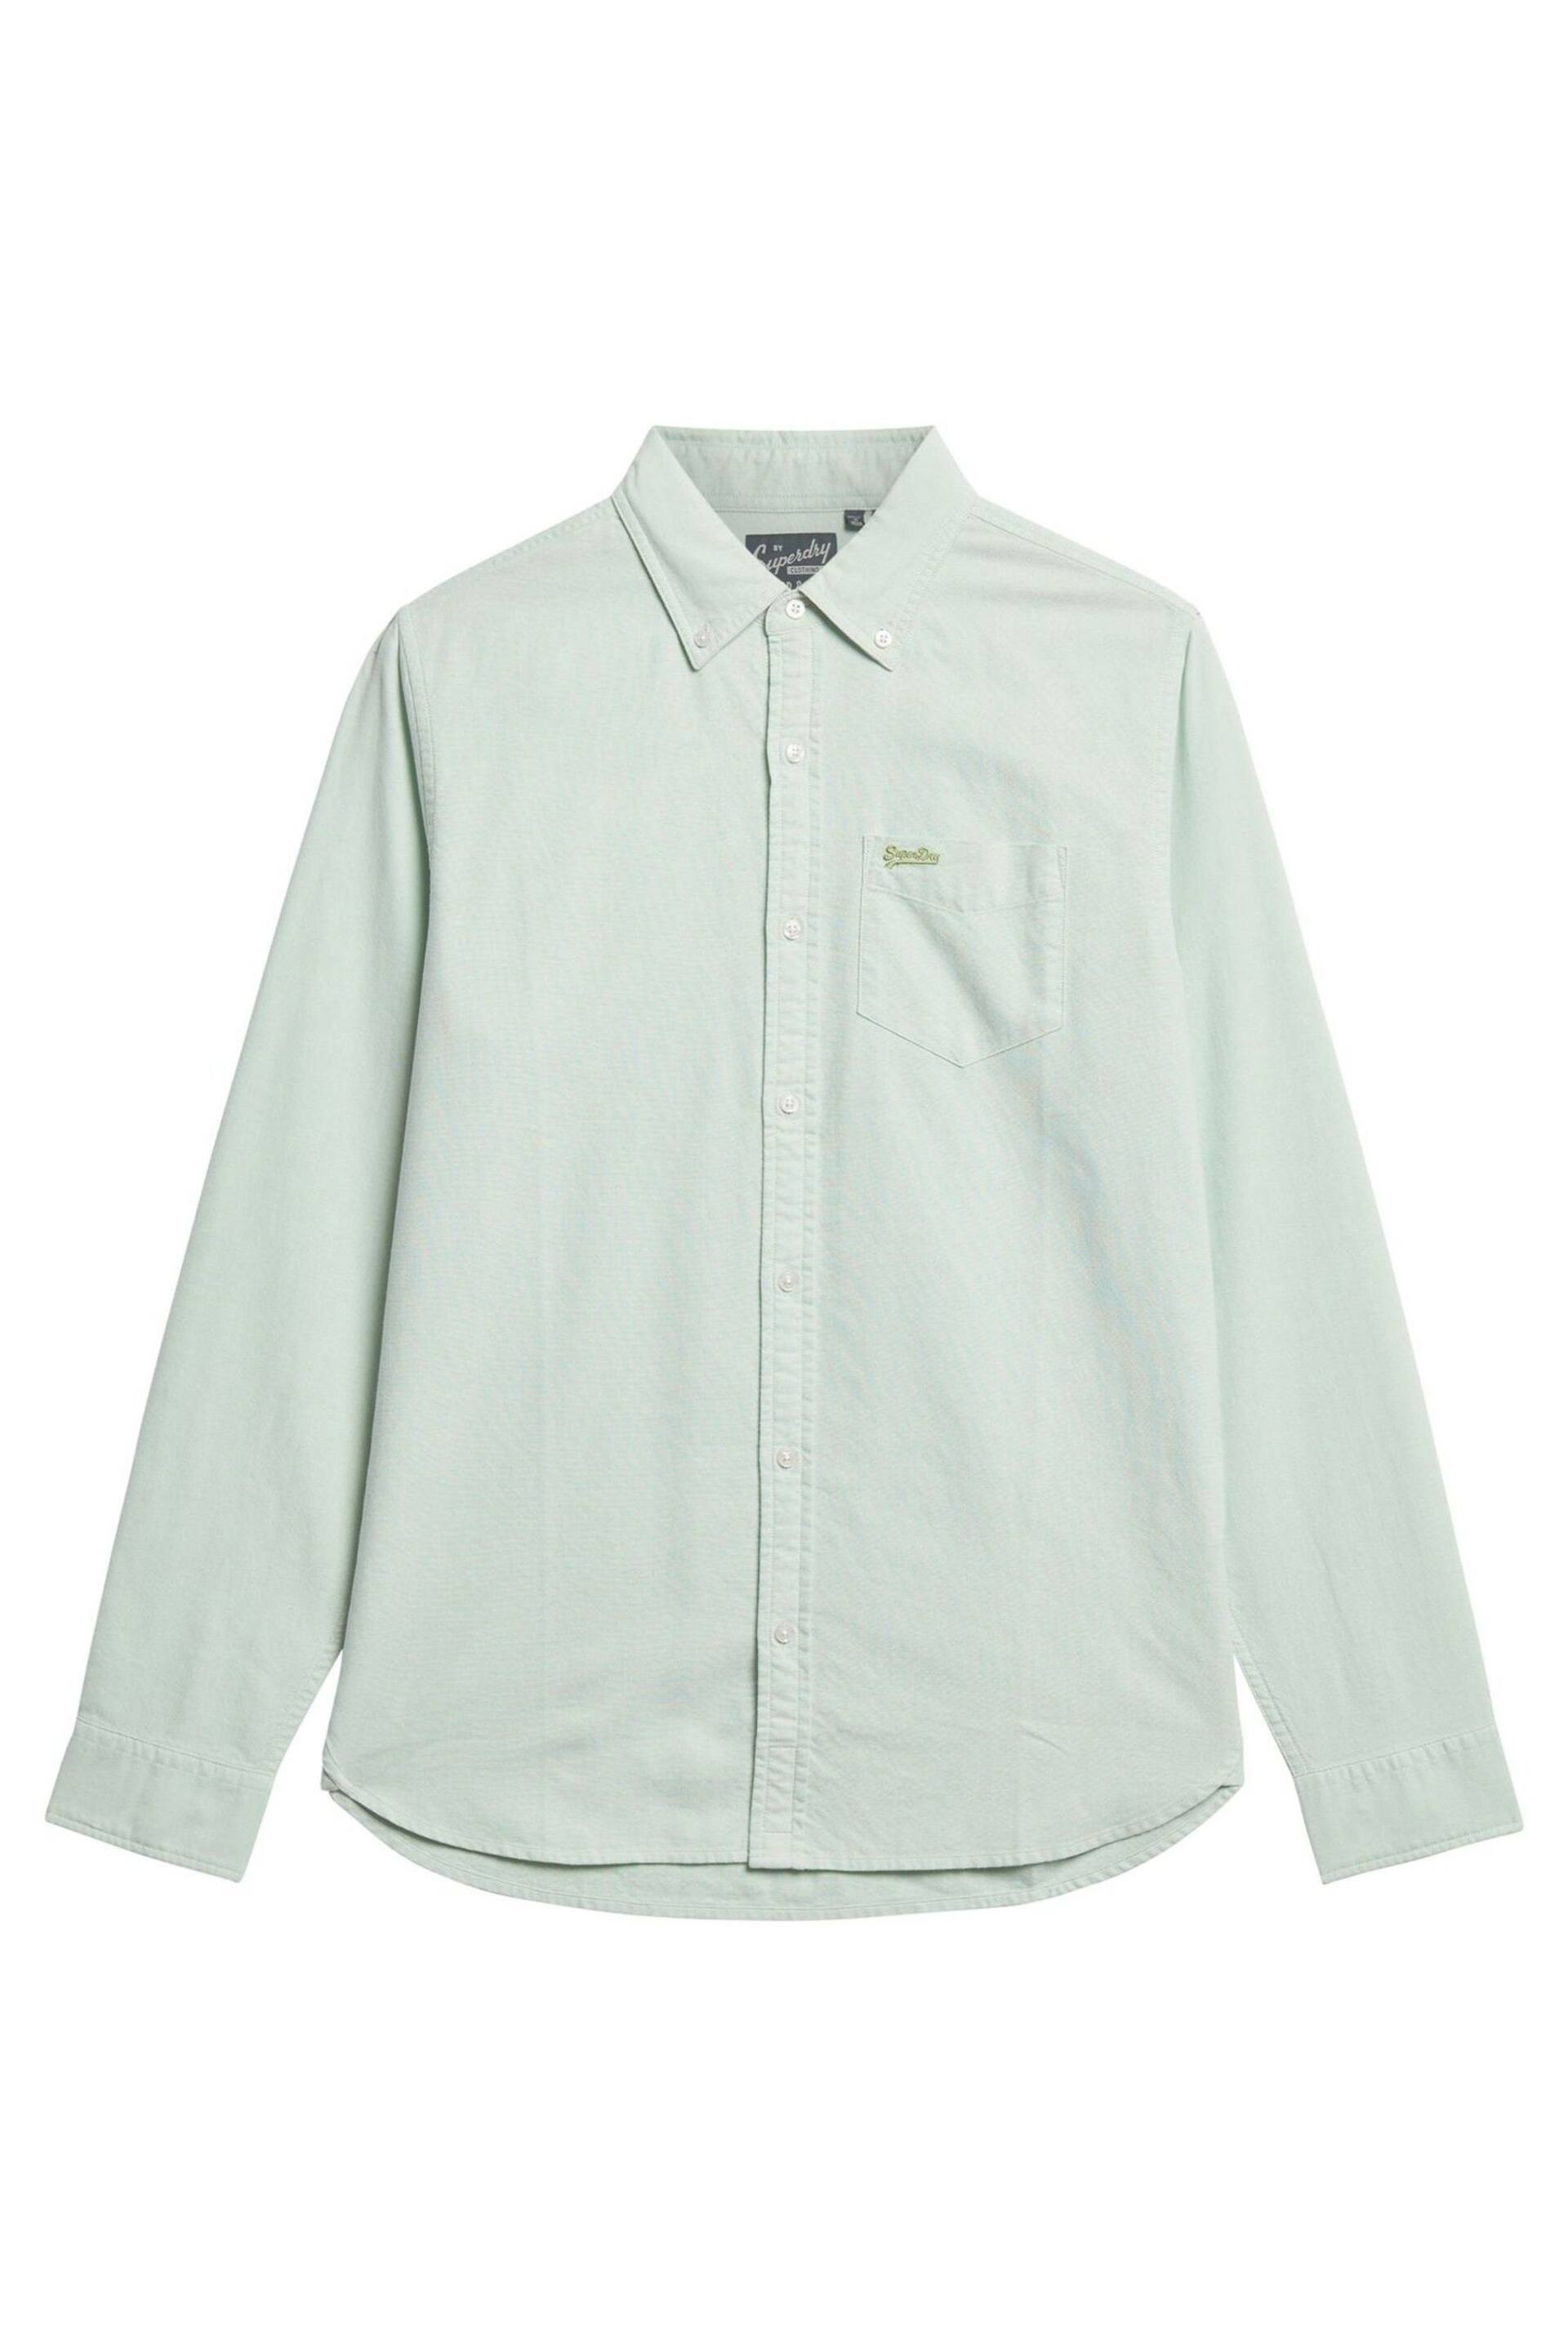 Superdry Light Green Cotton Long Sleeved Oxford Shirt - Image 3 of 5